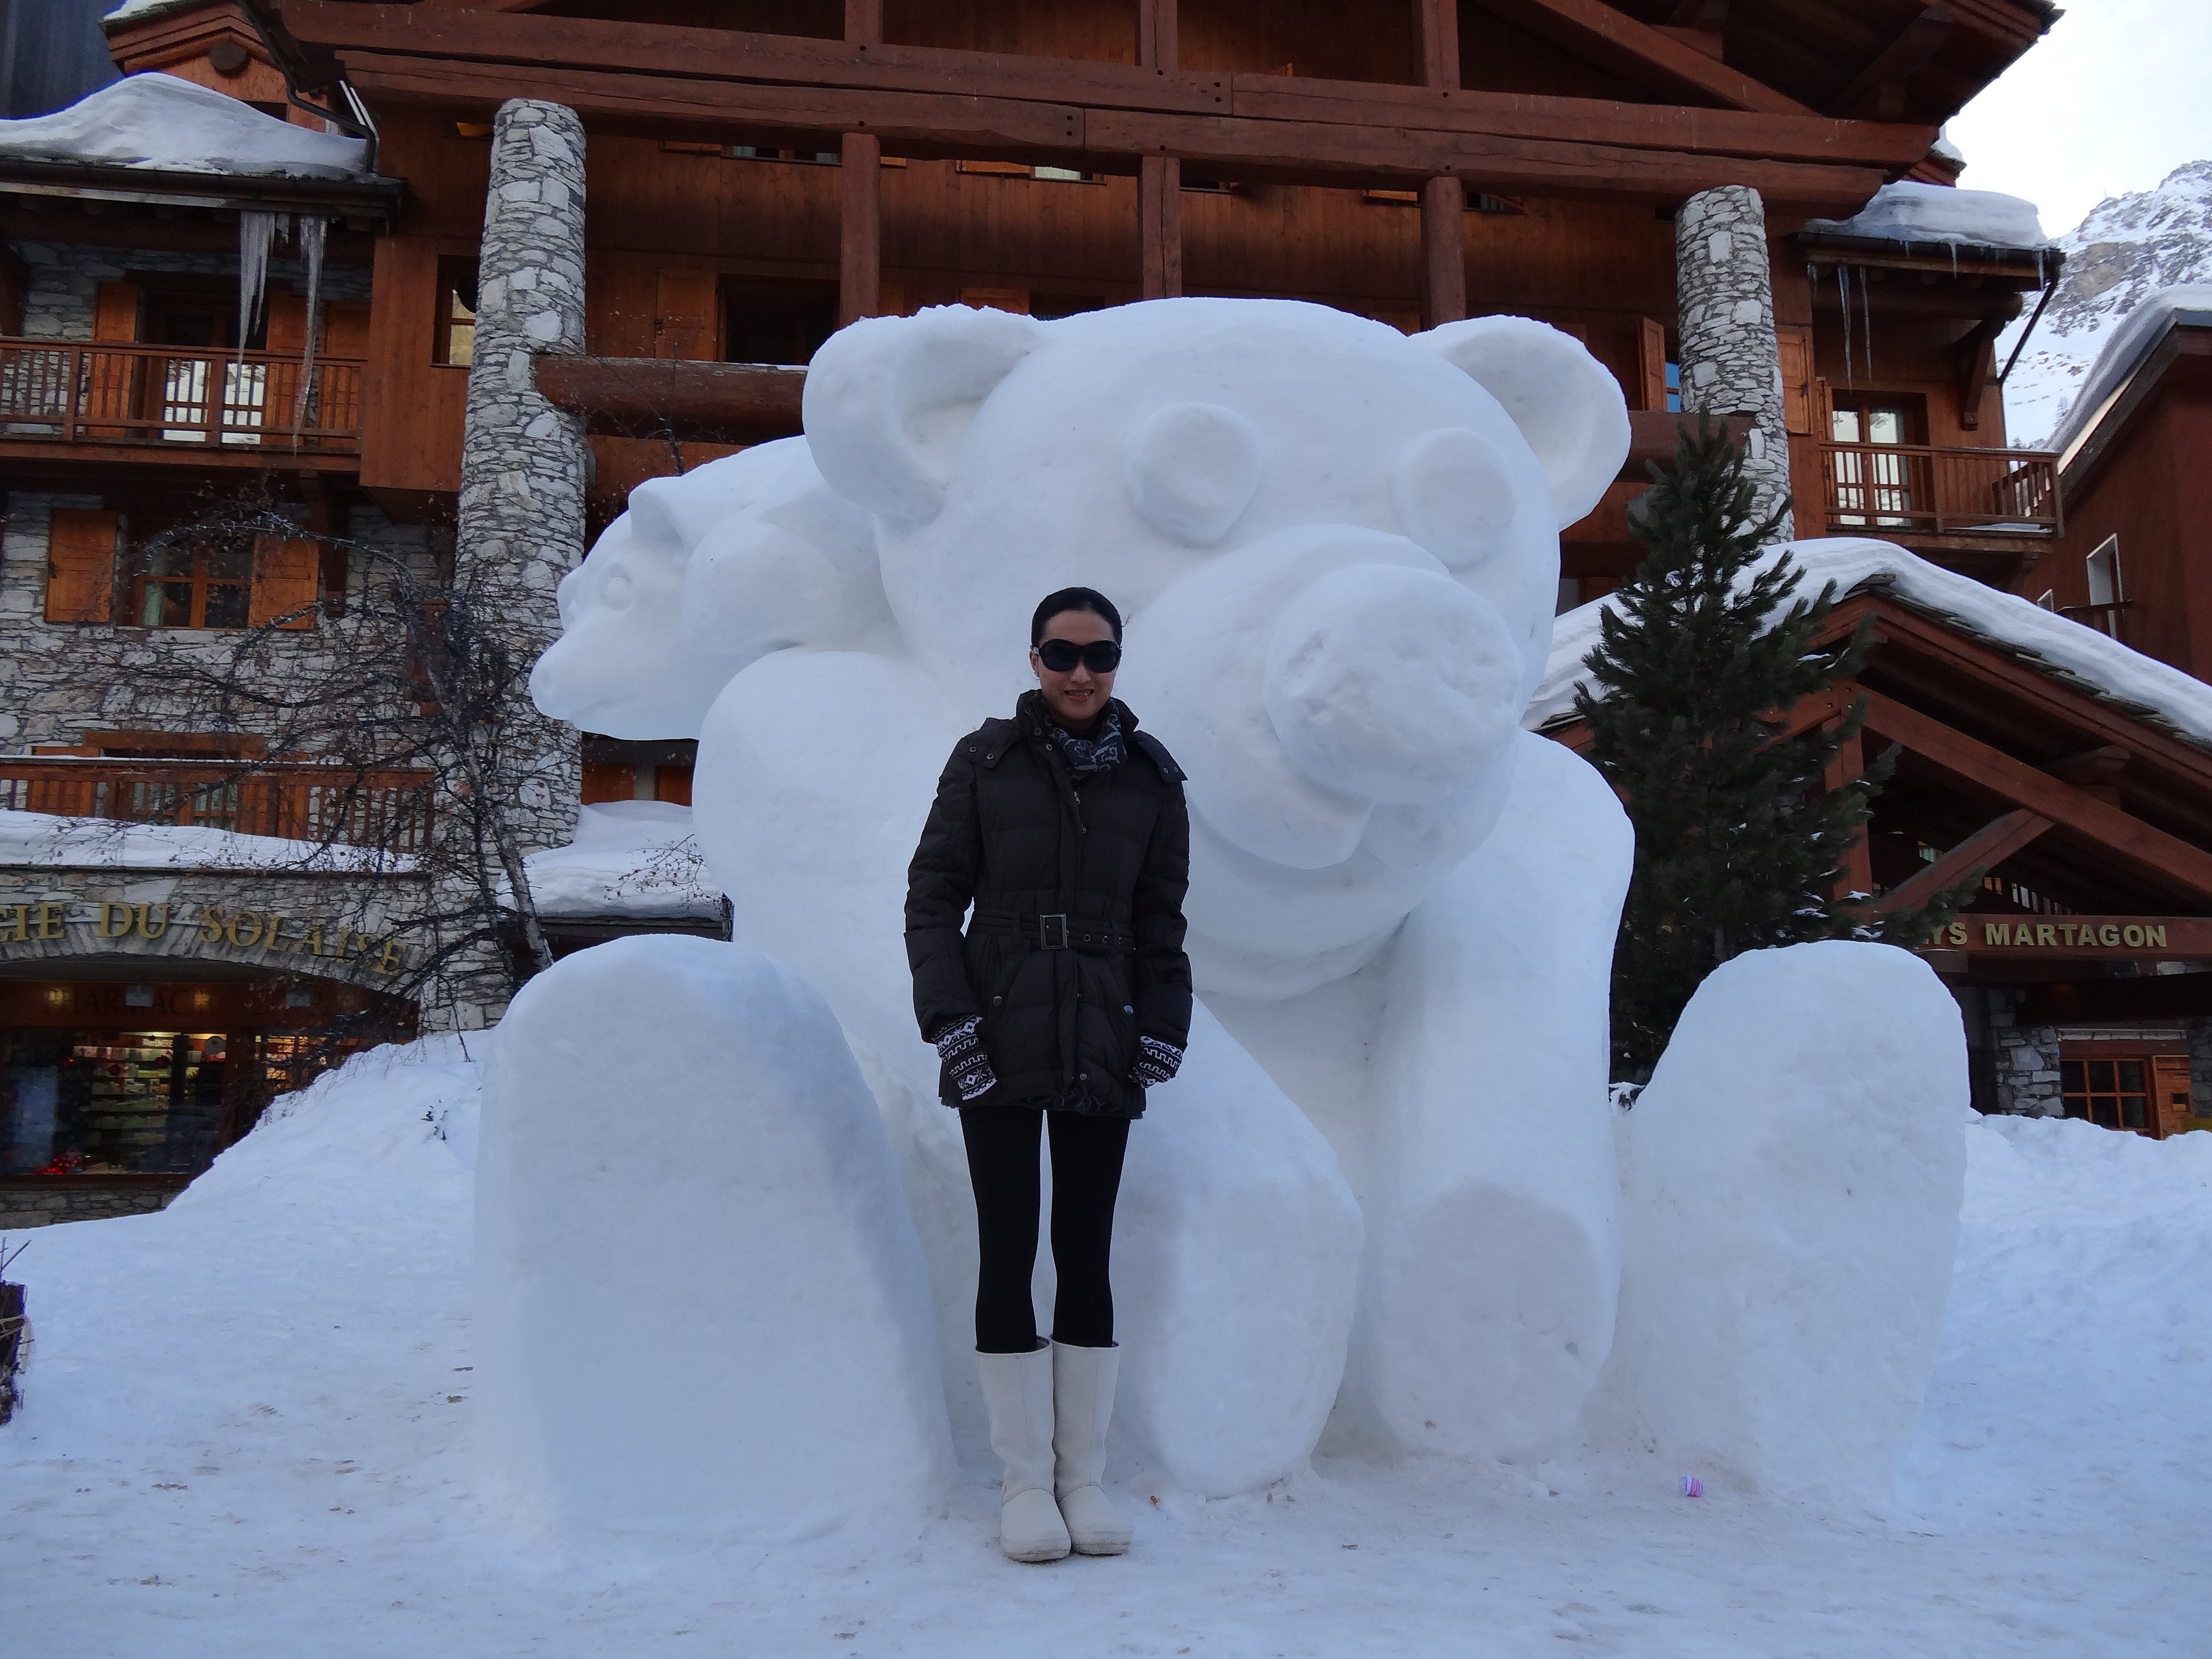 MY FITNESS, Pilates Singapore SKI TRIP IN FRANCE 2013 – May Yang